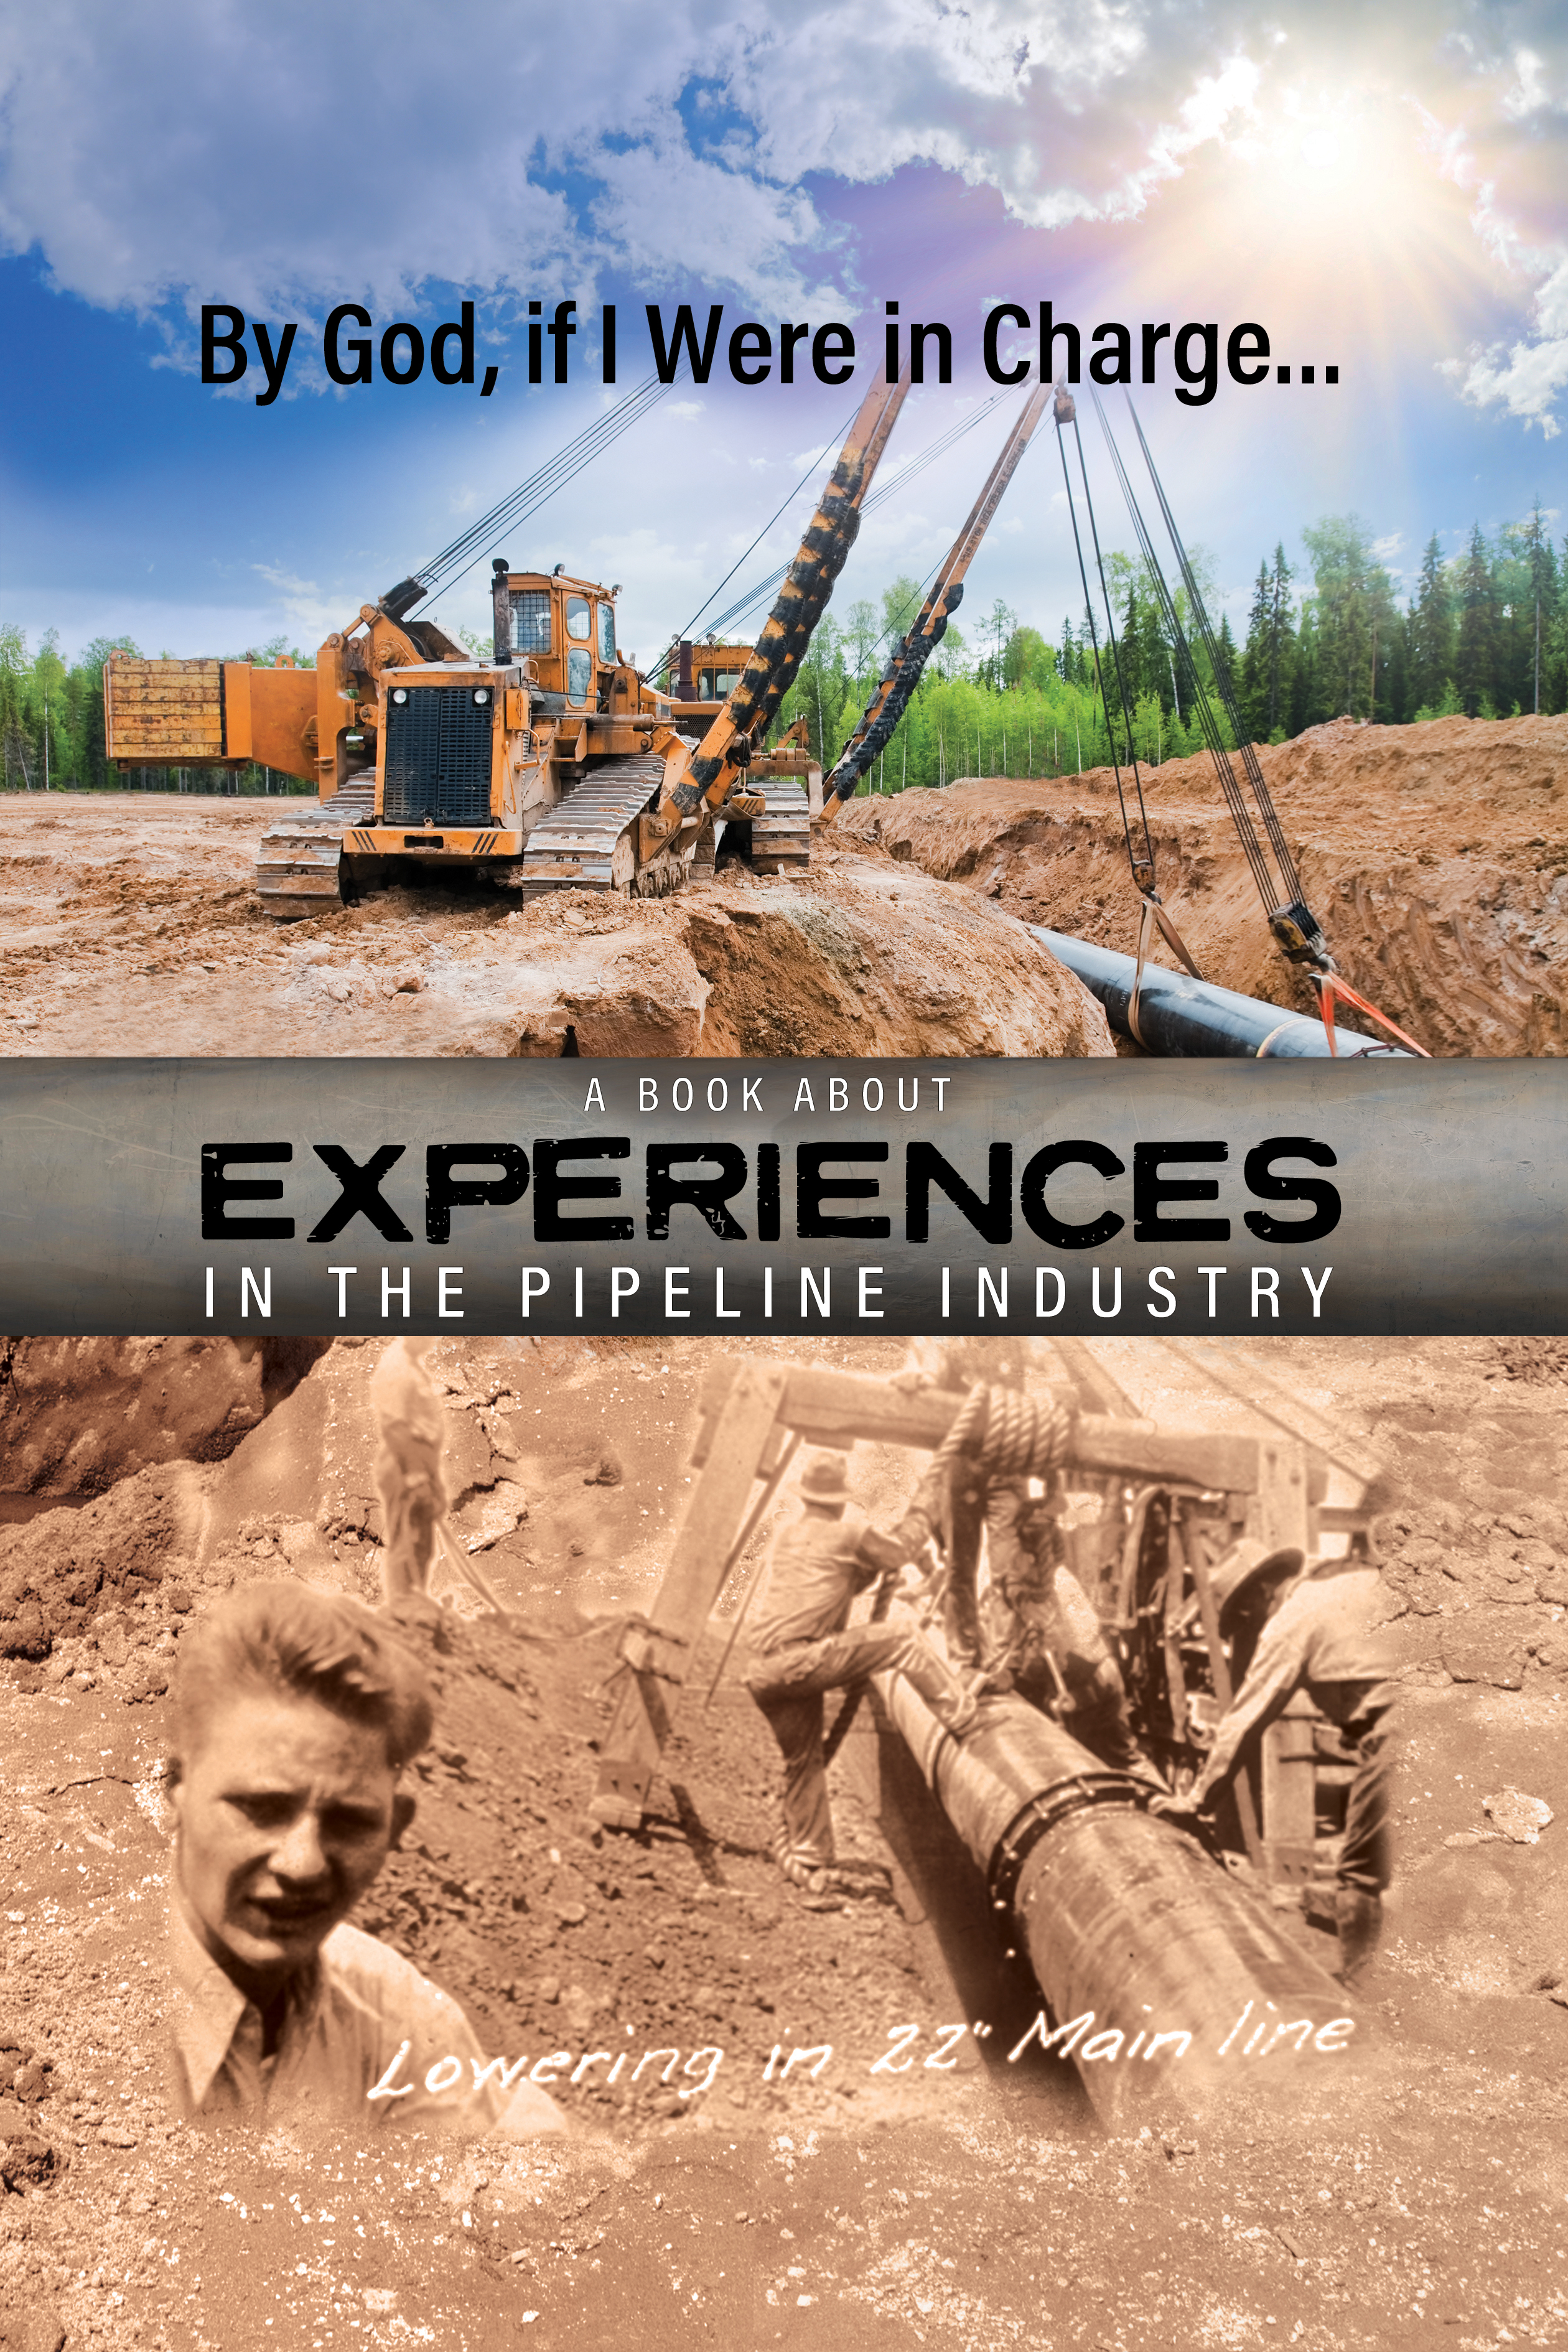 By God, if I Were in Charge…a book about experiences in the pipeline industry
